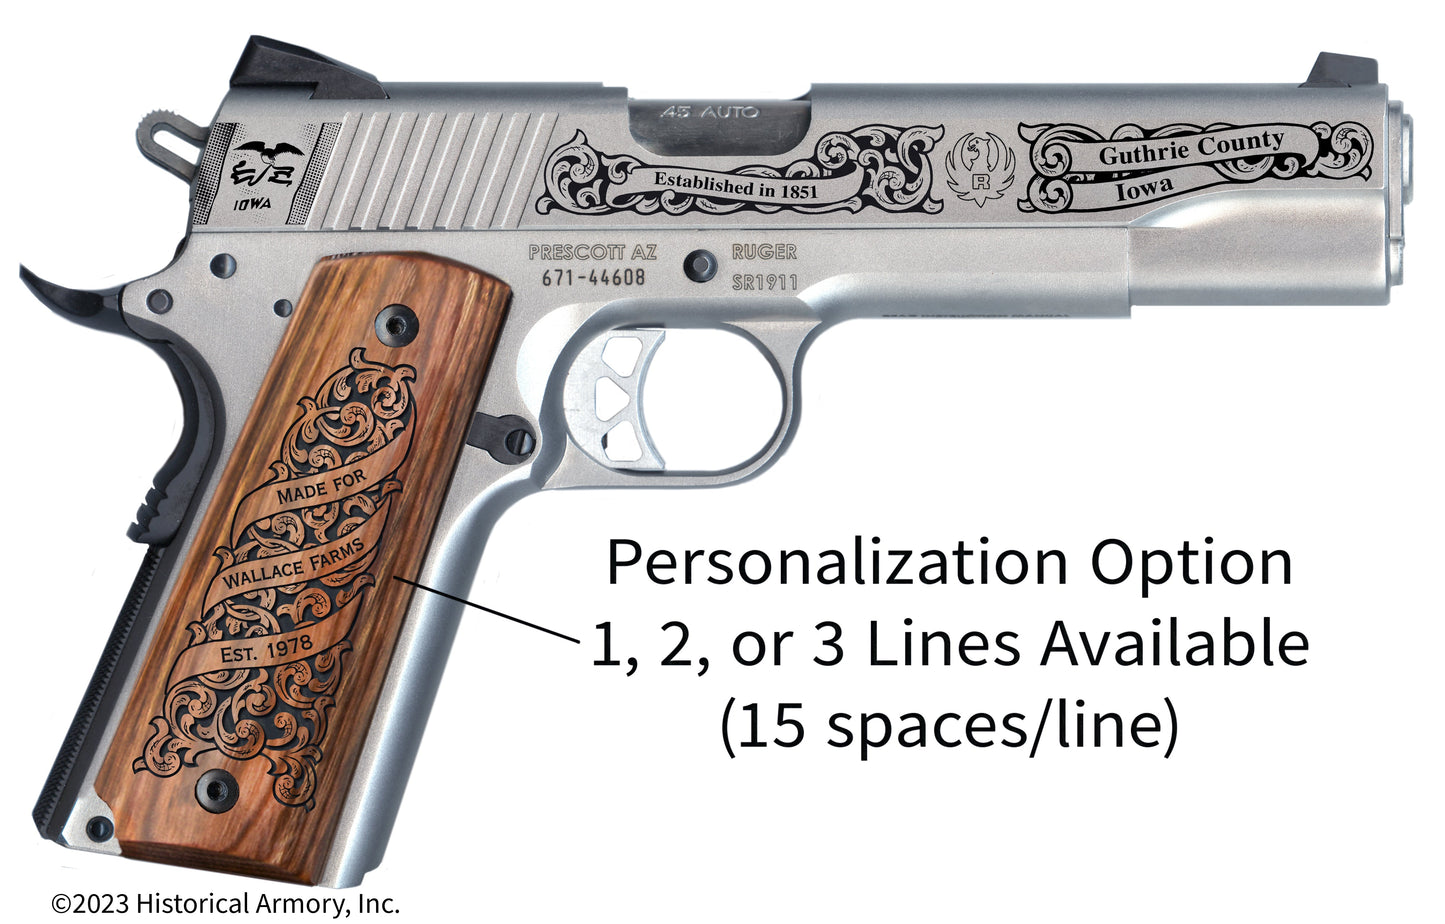 Guthrie County Iowa Personalized Engraved .45 Auto Ruger 1911